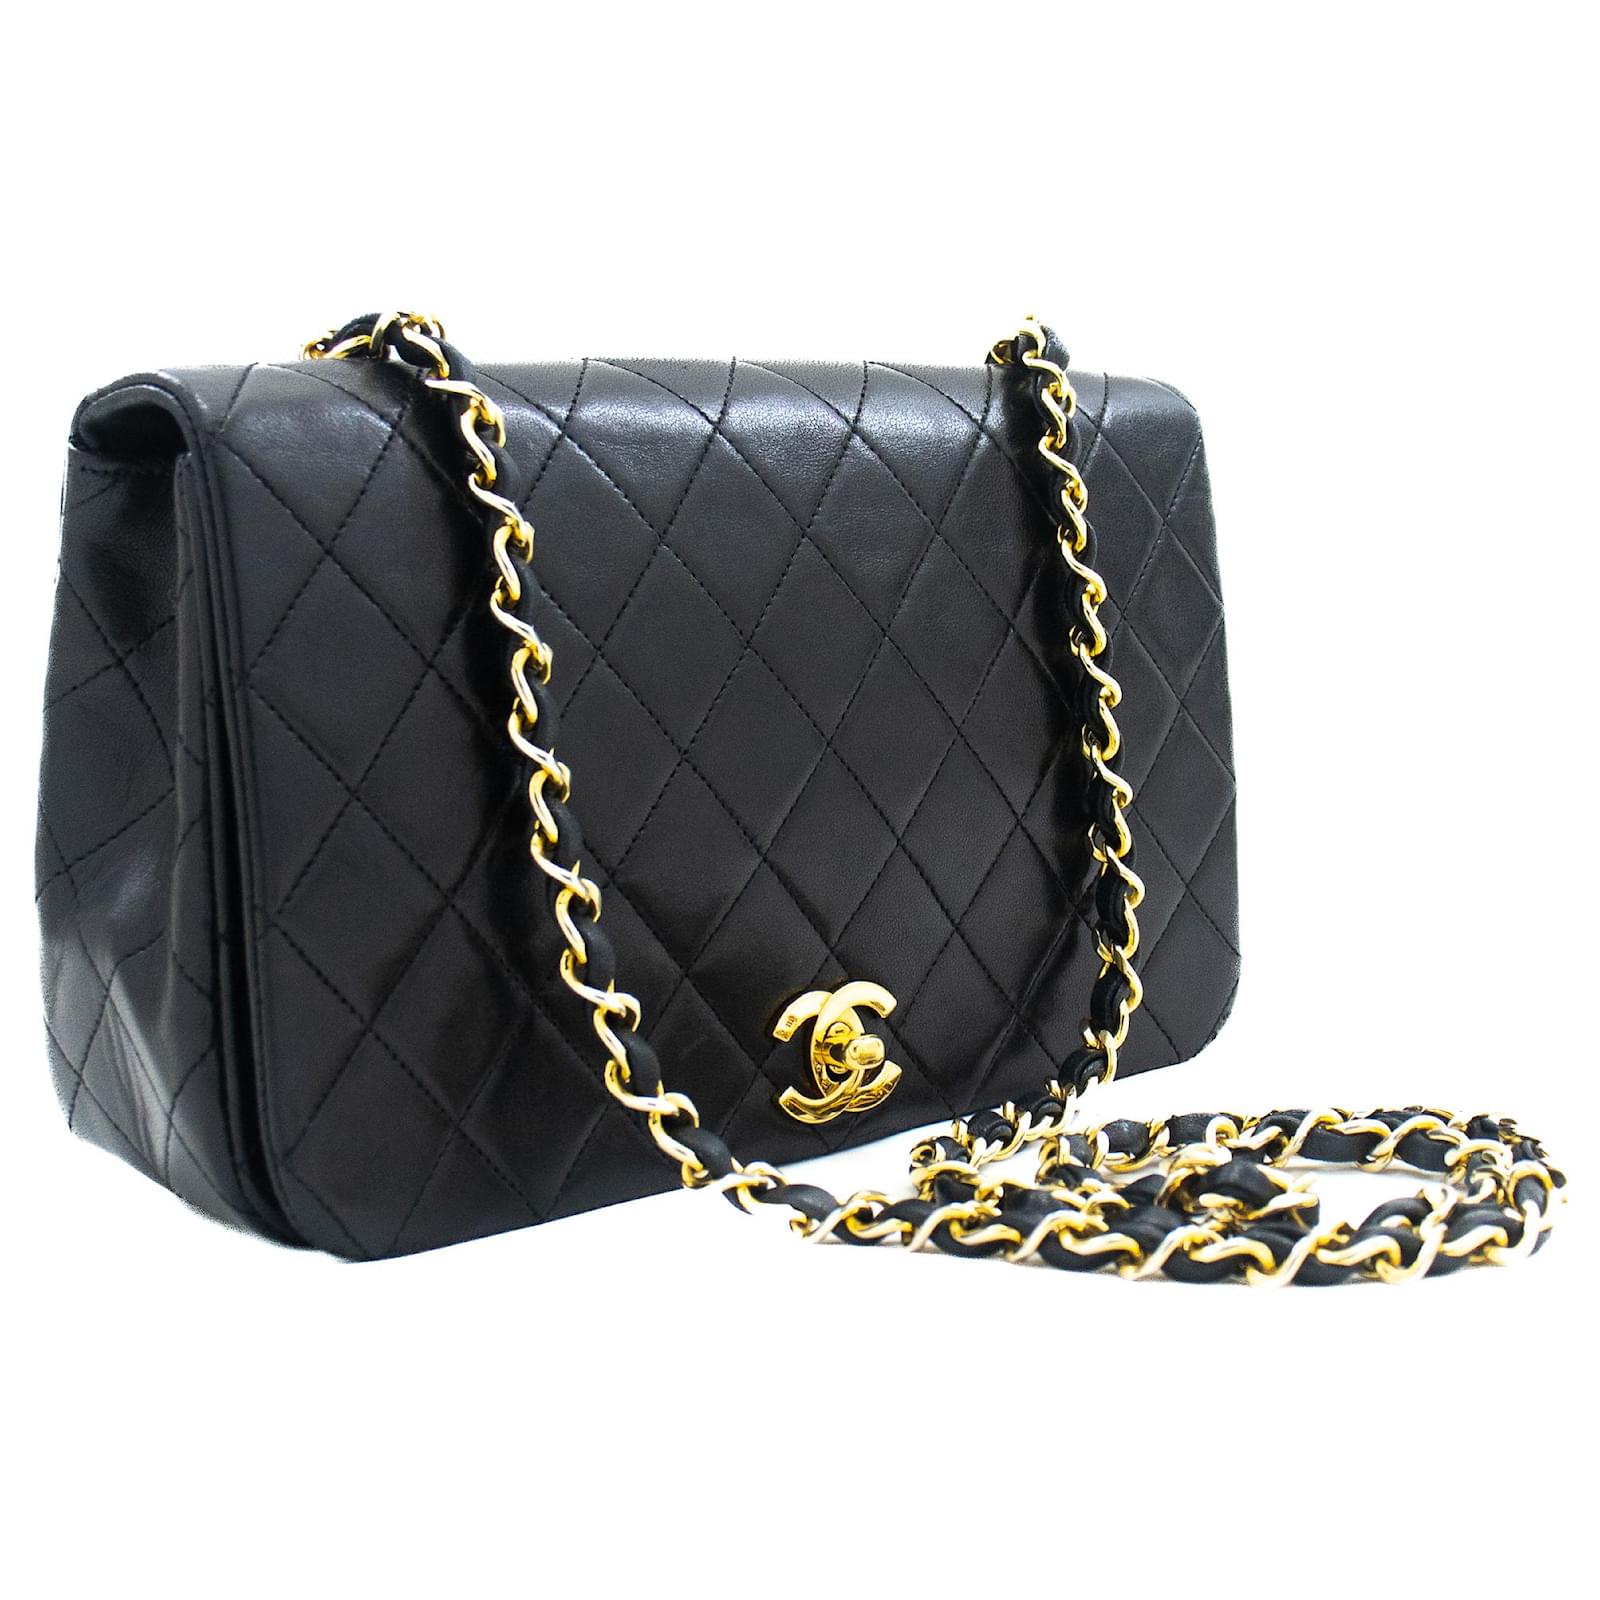 CHANEL Full Flap Chain Shoulder Bag Black Quilted Lambskin Purse